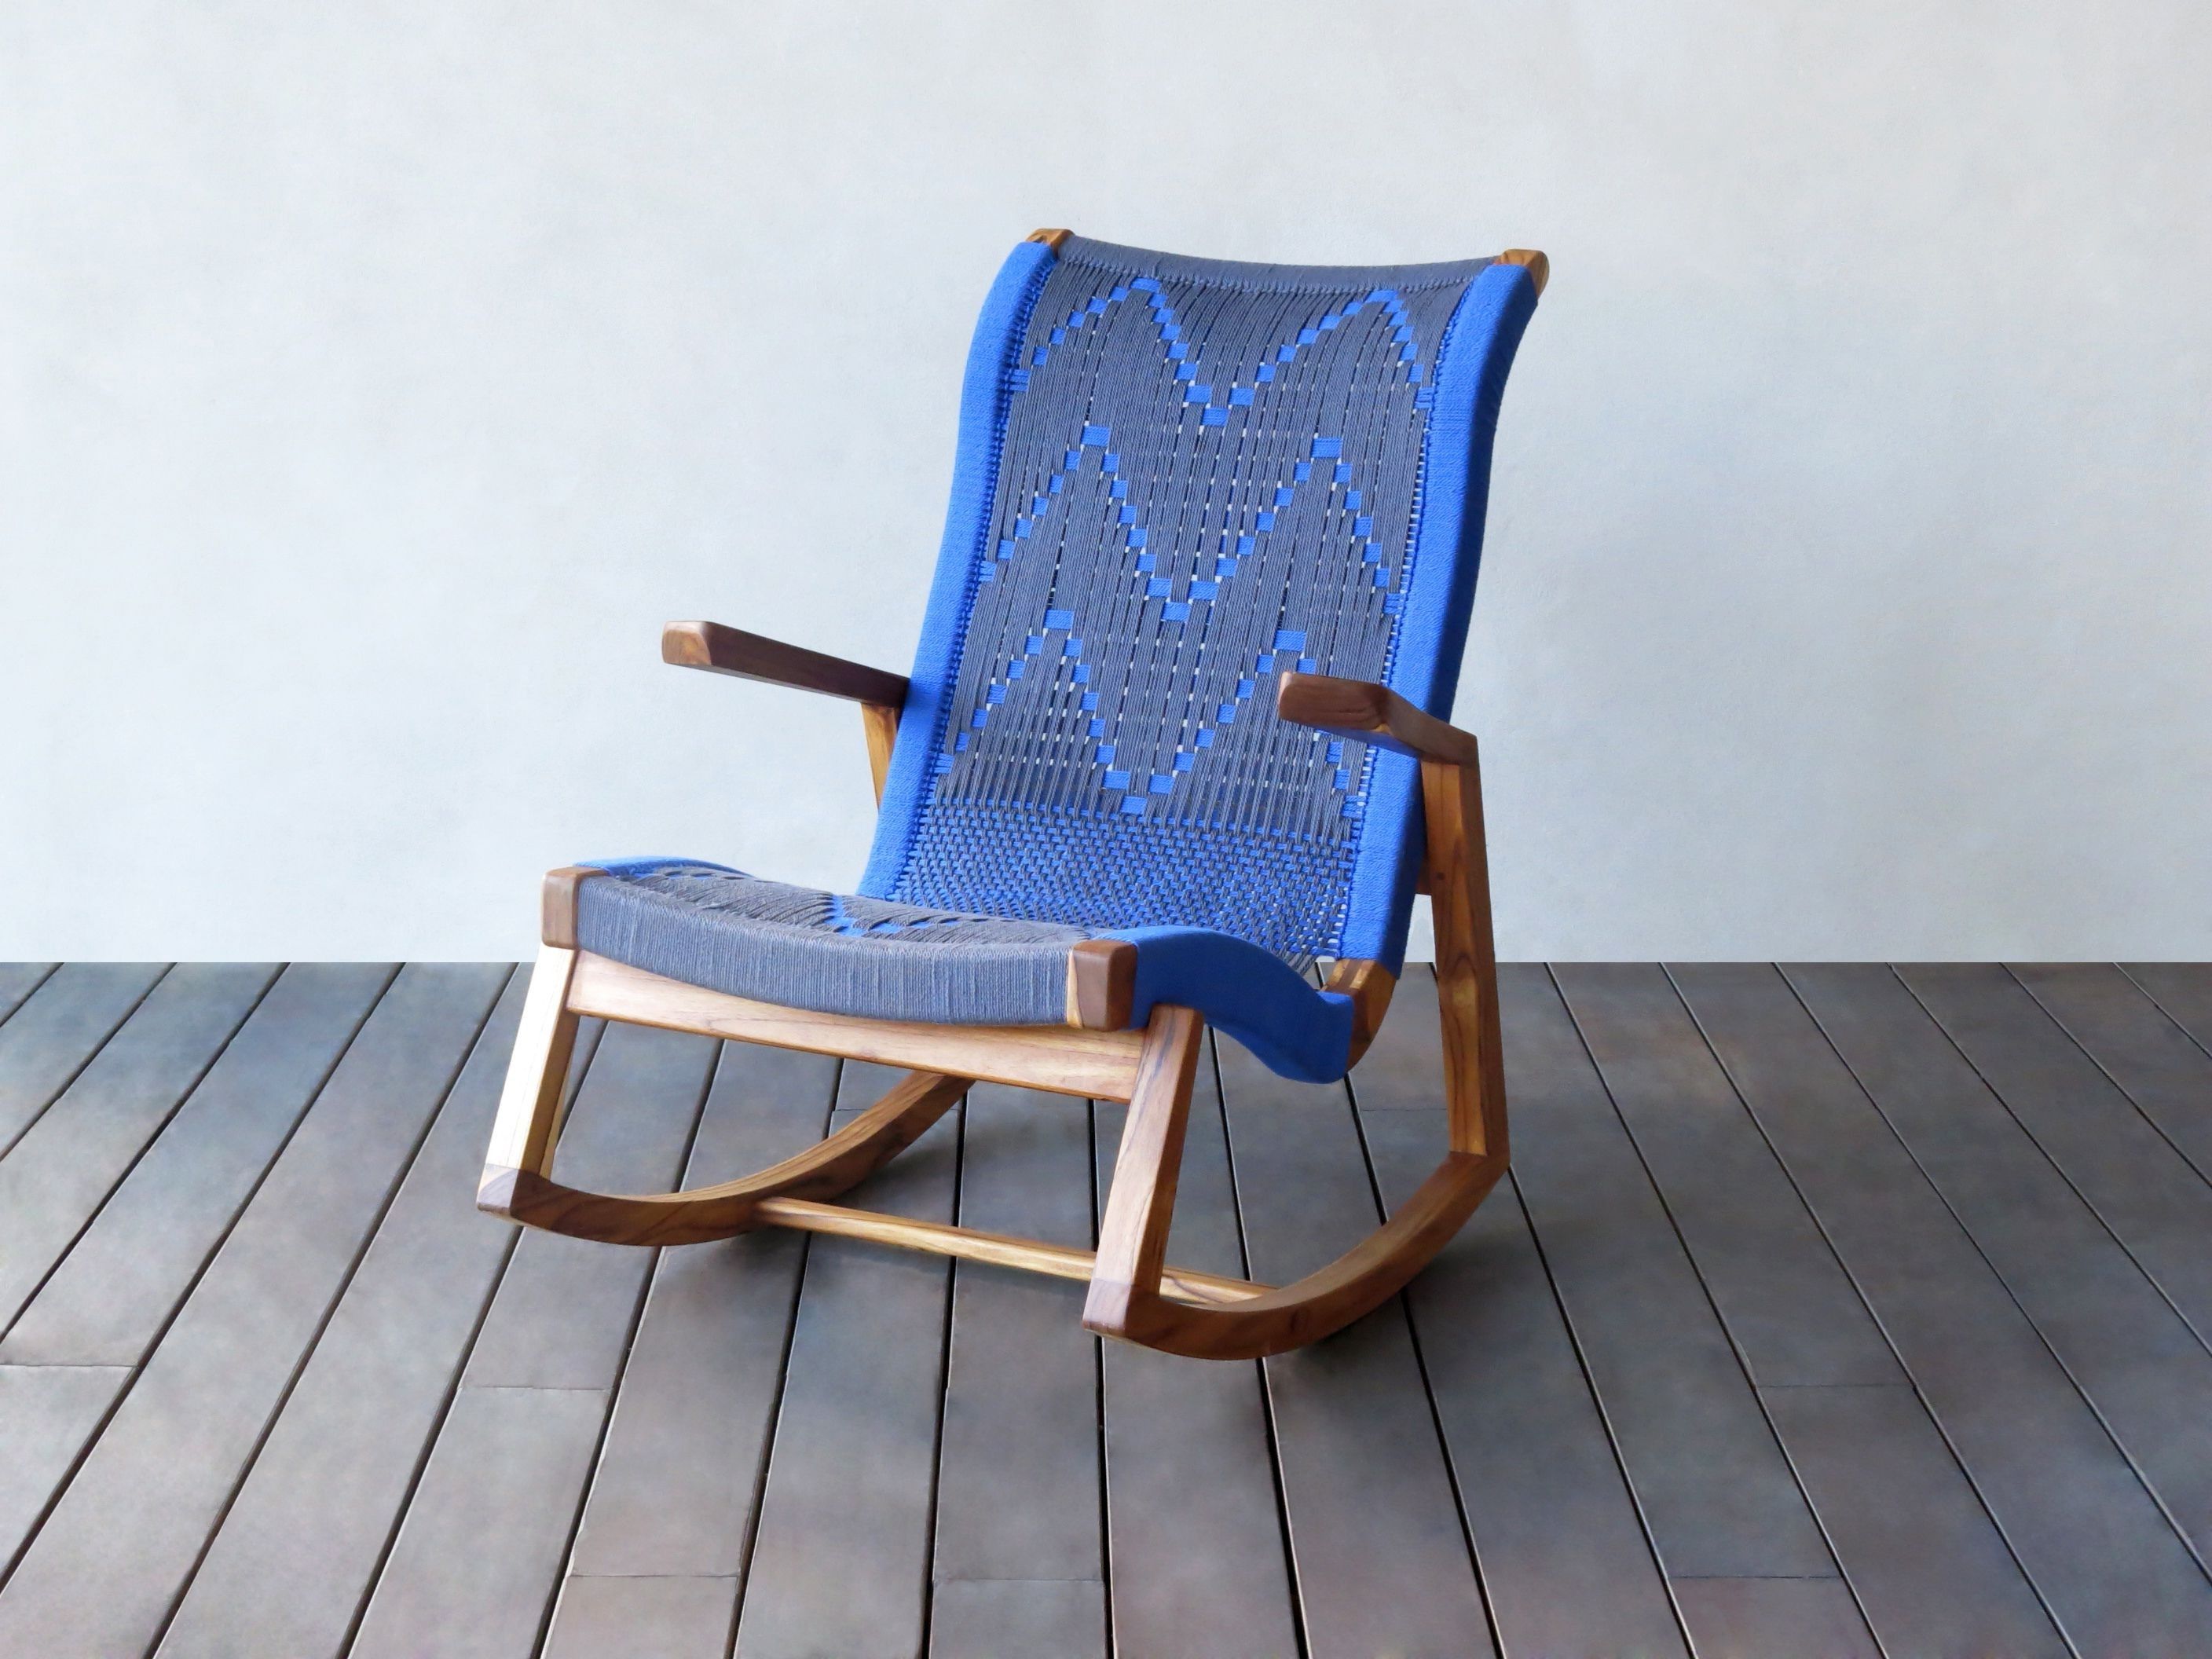 Most Popular Mid Century Modern Rocking Chair Teak Handwoven Pattern Lounge Ideas Pertaining To Rocking Chairs At Sam\'s Club (View 12 of 15)